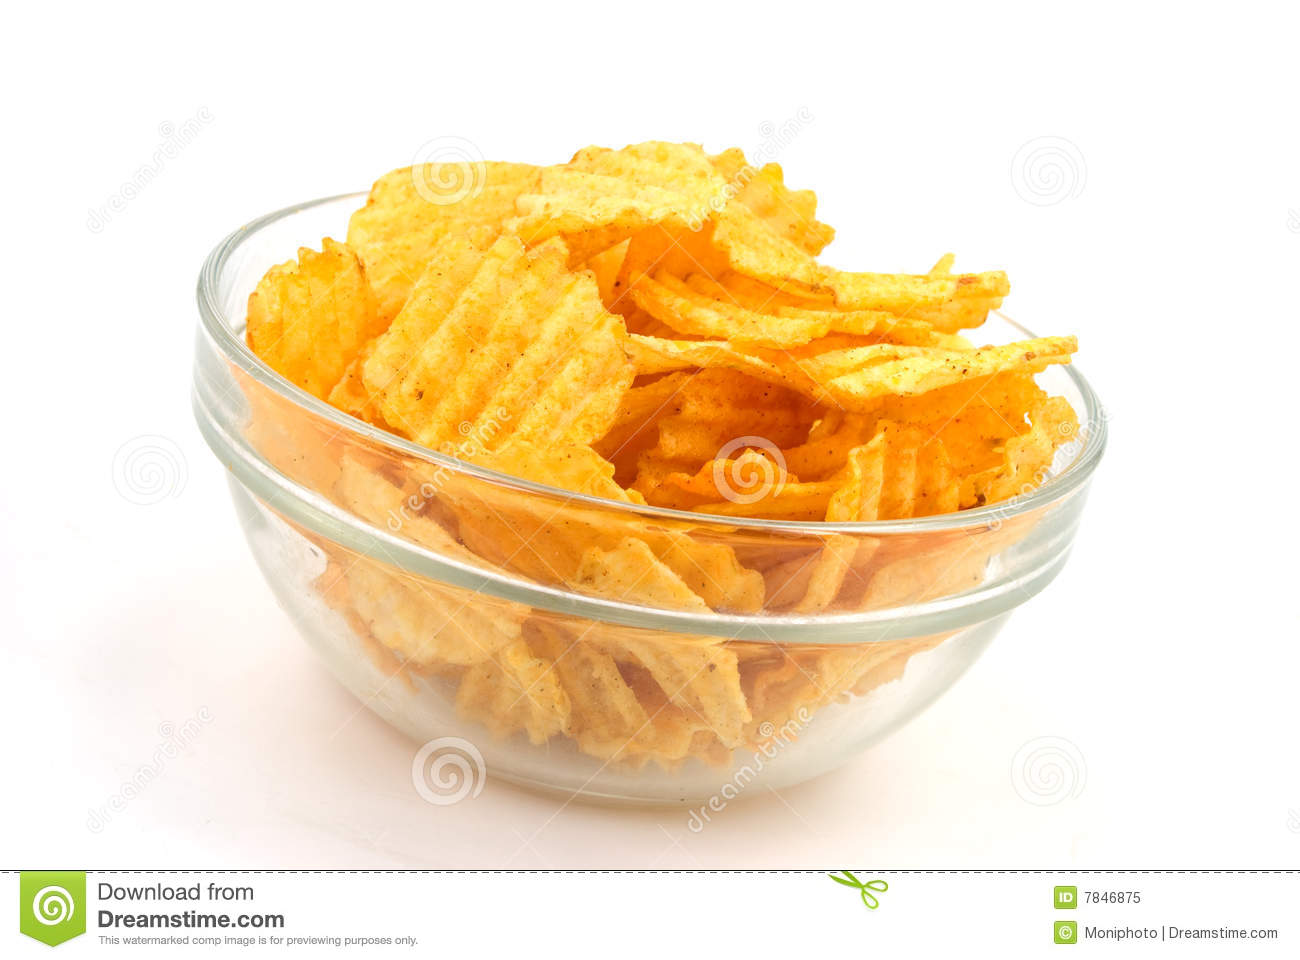 Potato Chips In A Bowl Royalty Free Stock Photo   Image  7846875